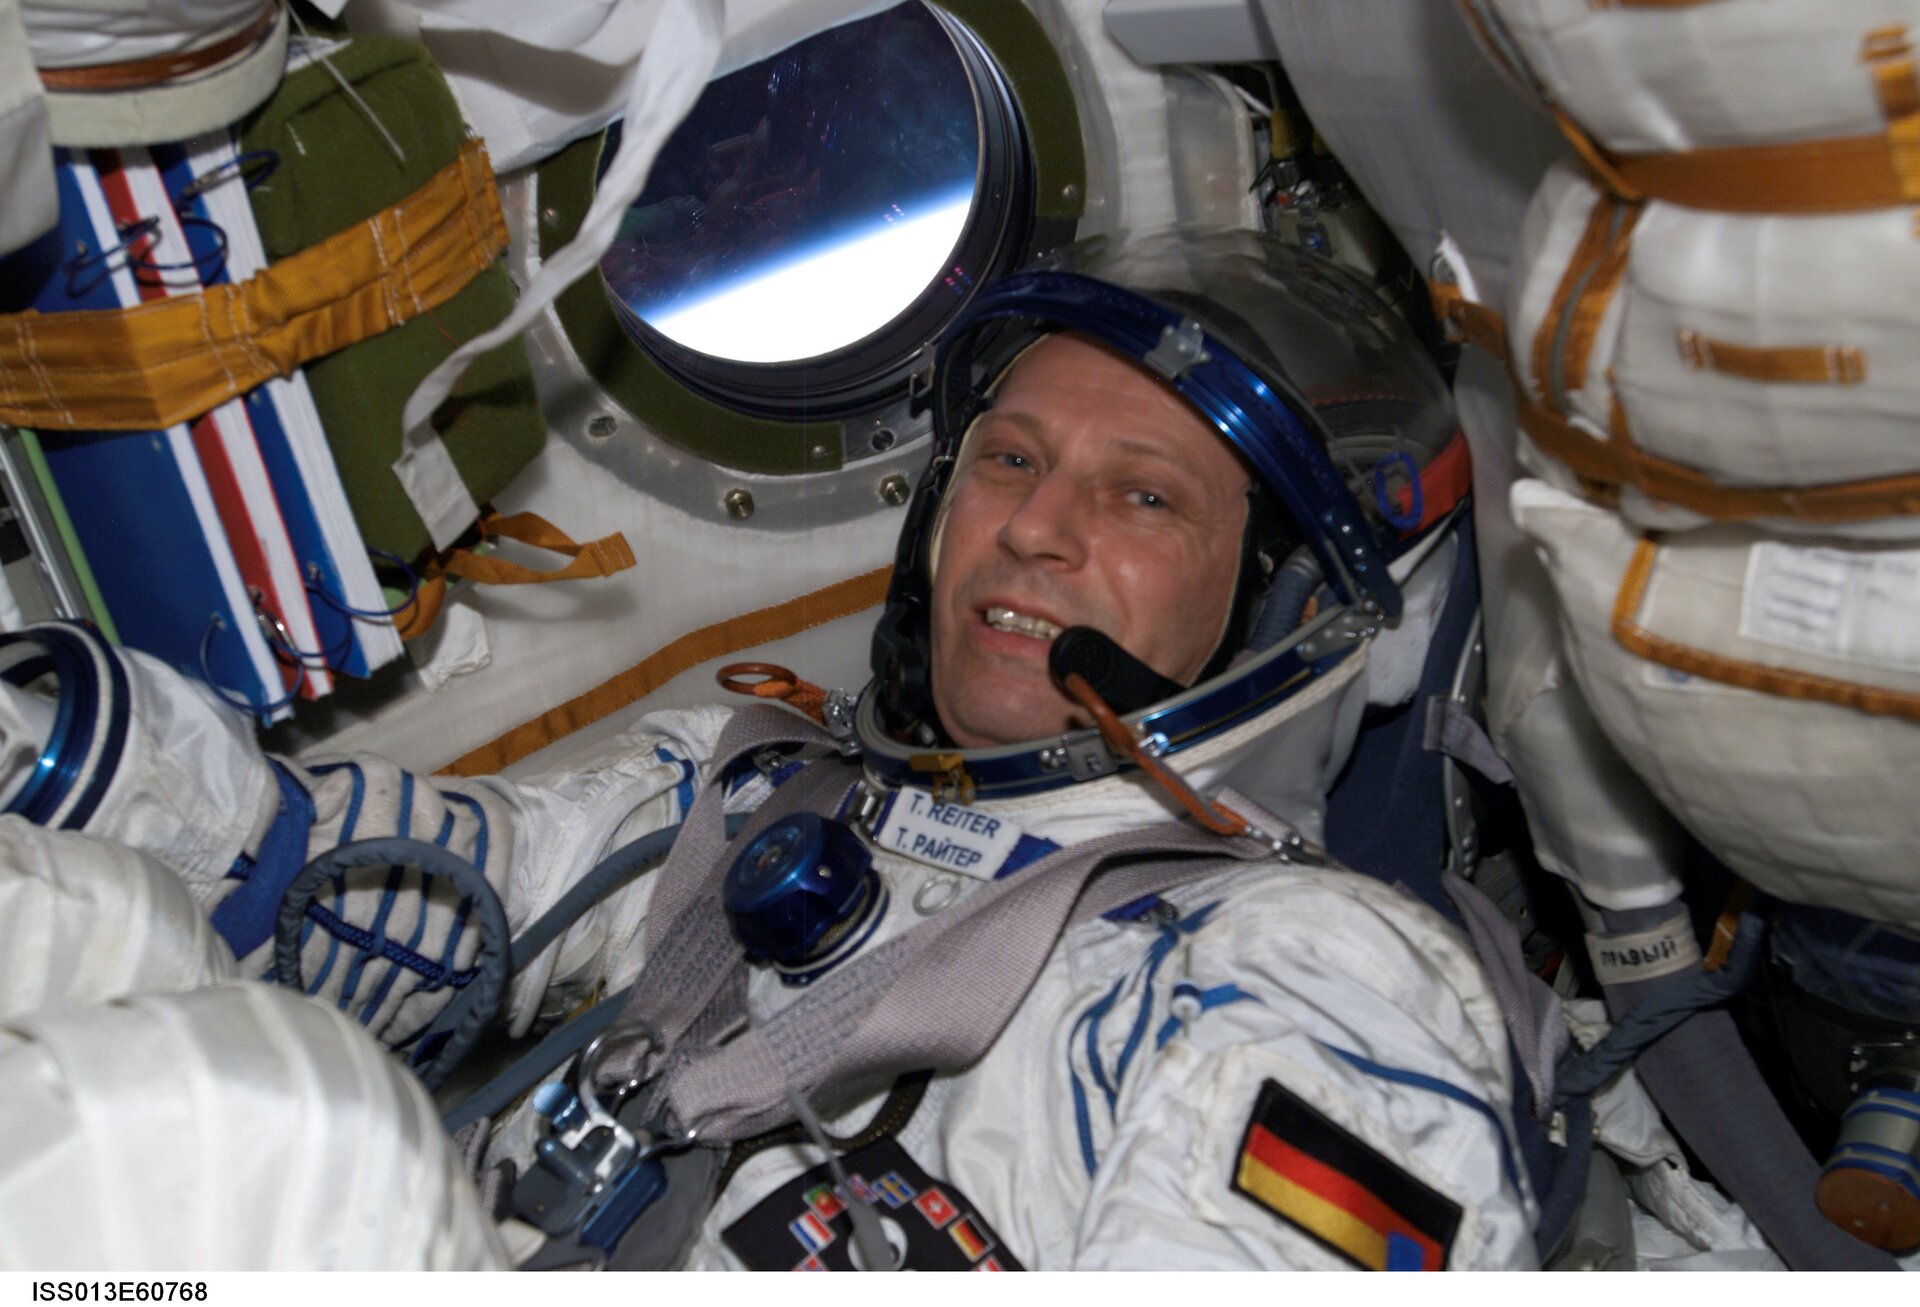 The crew will wear their Russian Sokol spacesuits inside the Soyuz